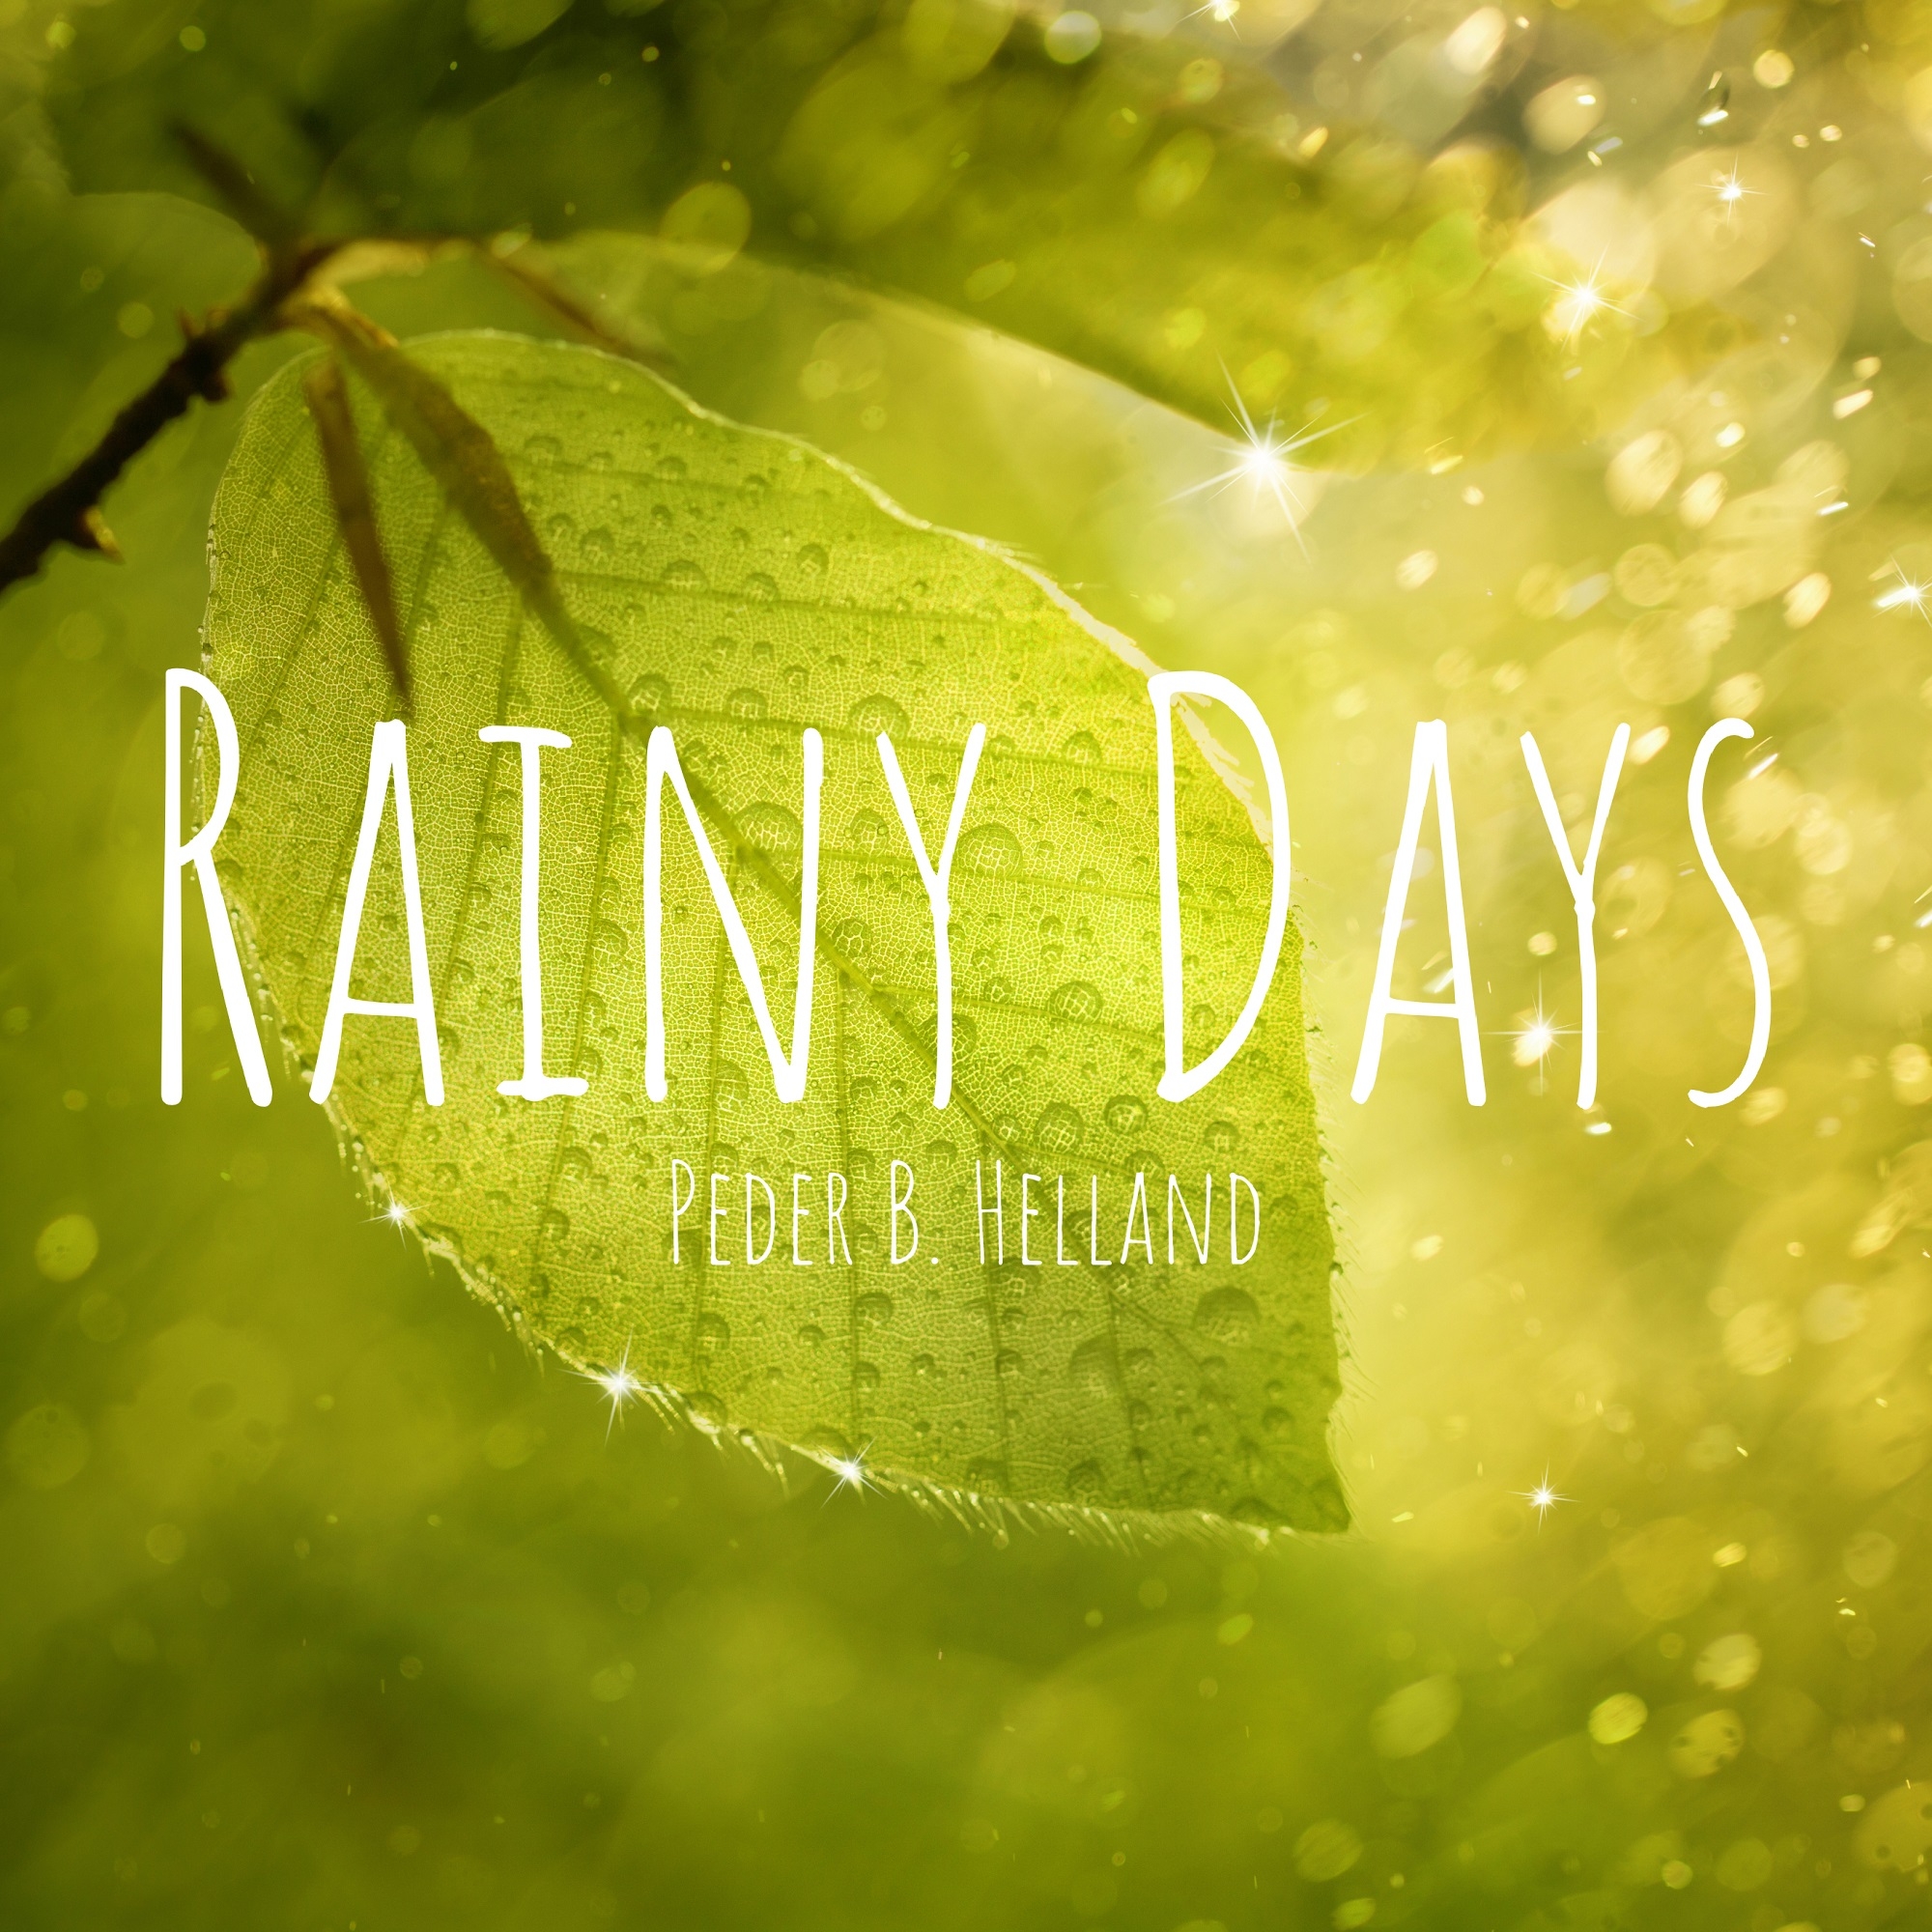 Cover art for the single Raindrops by Peder B. Helland